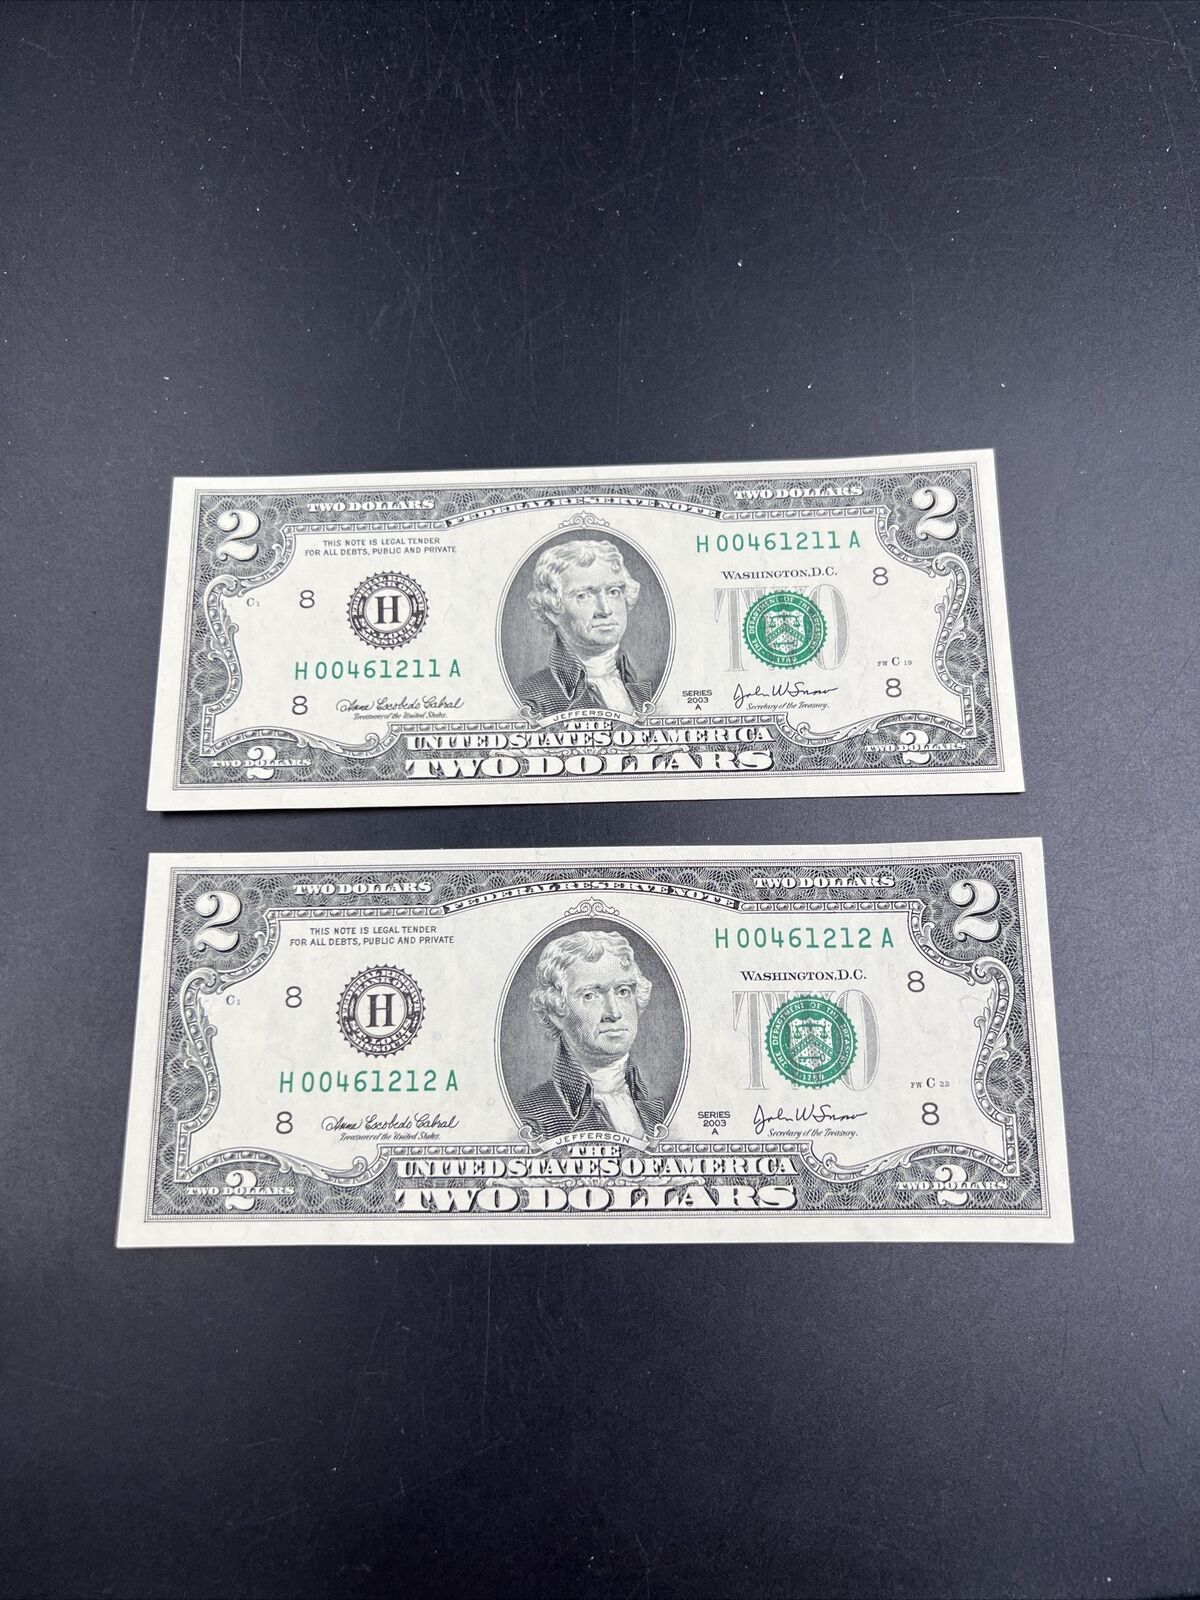 2 Consecutive 2003 A $2 FRN Federal Reserve Note Choice UNC Repeat Serial Number